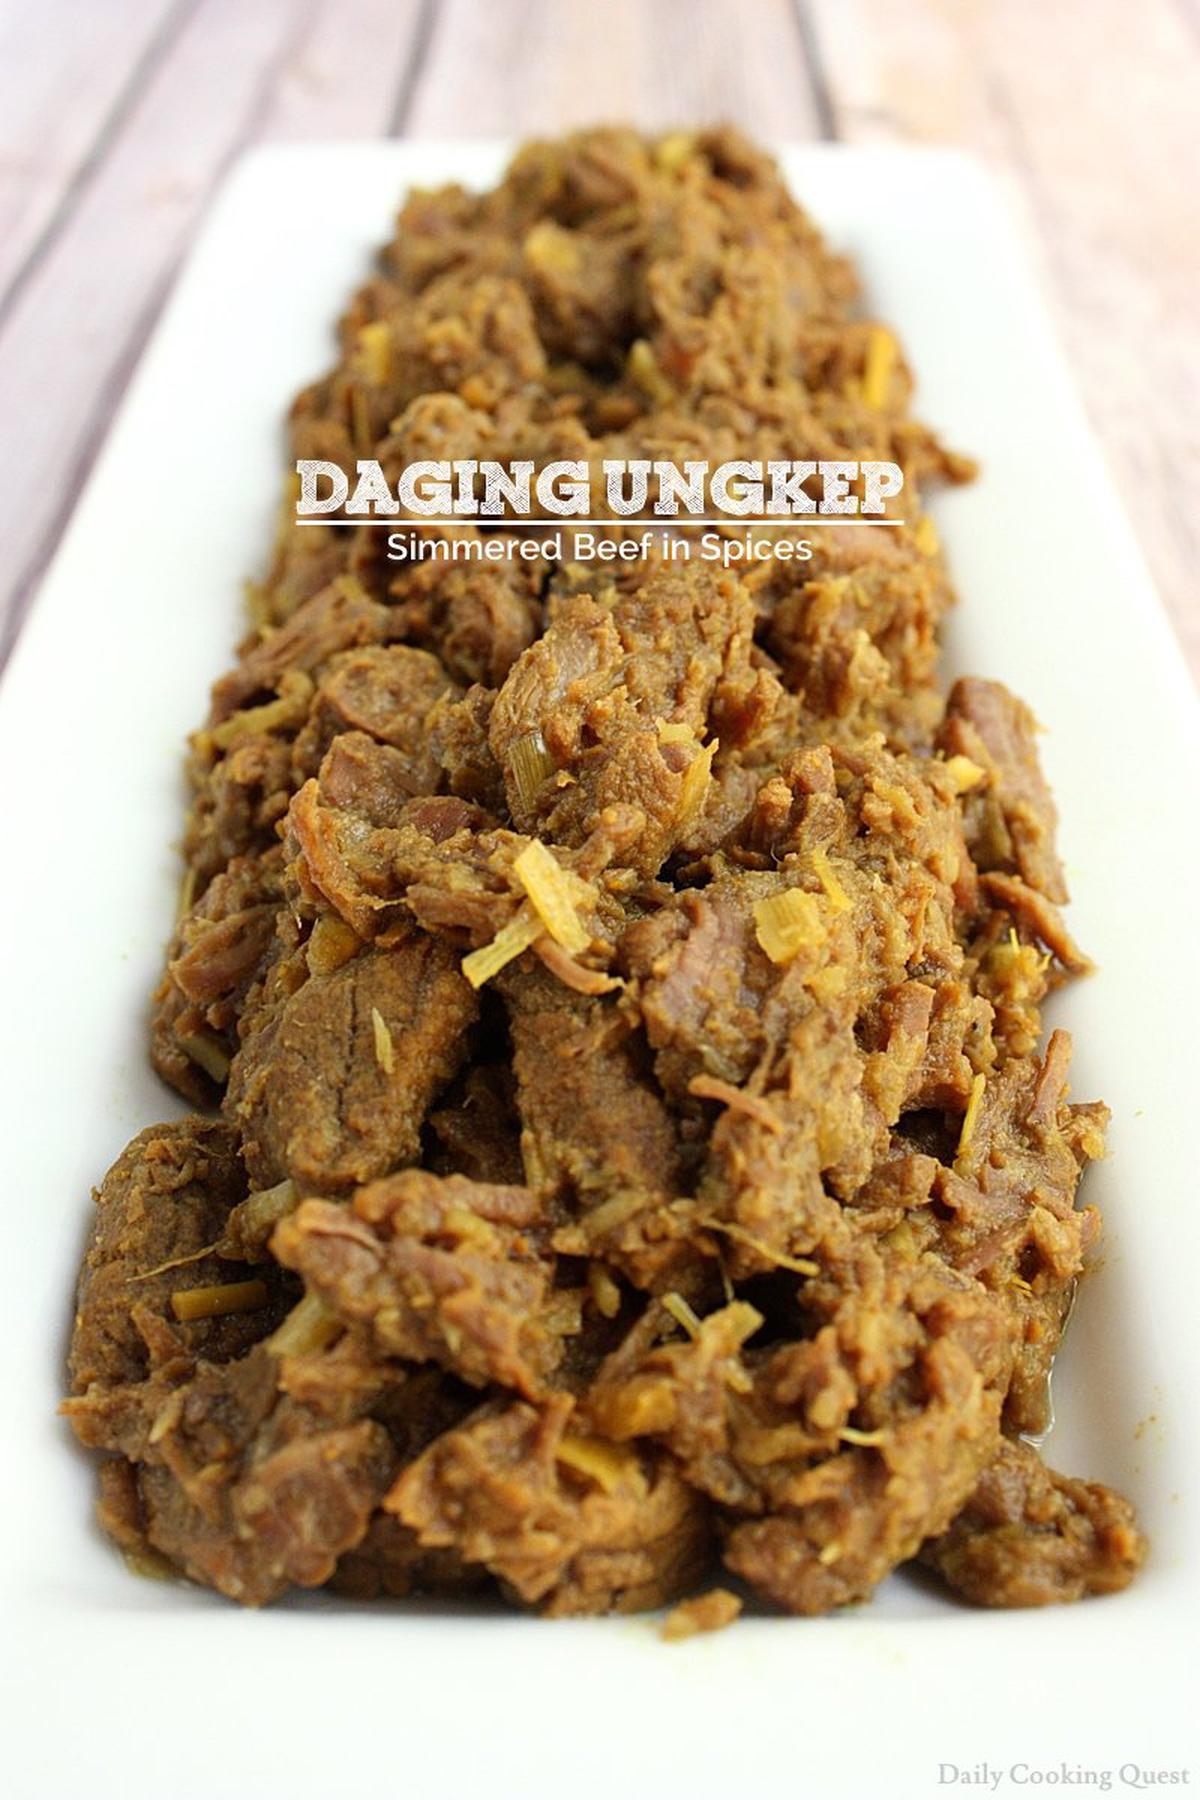 Daging Ungkep - Simmered Beef in Spices